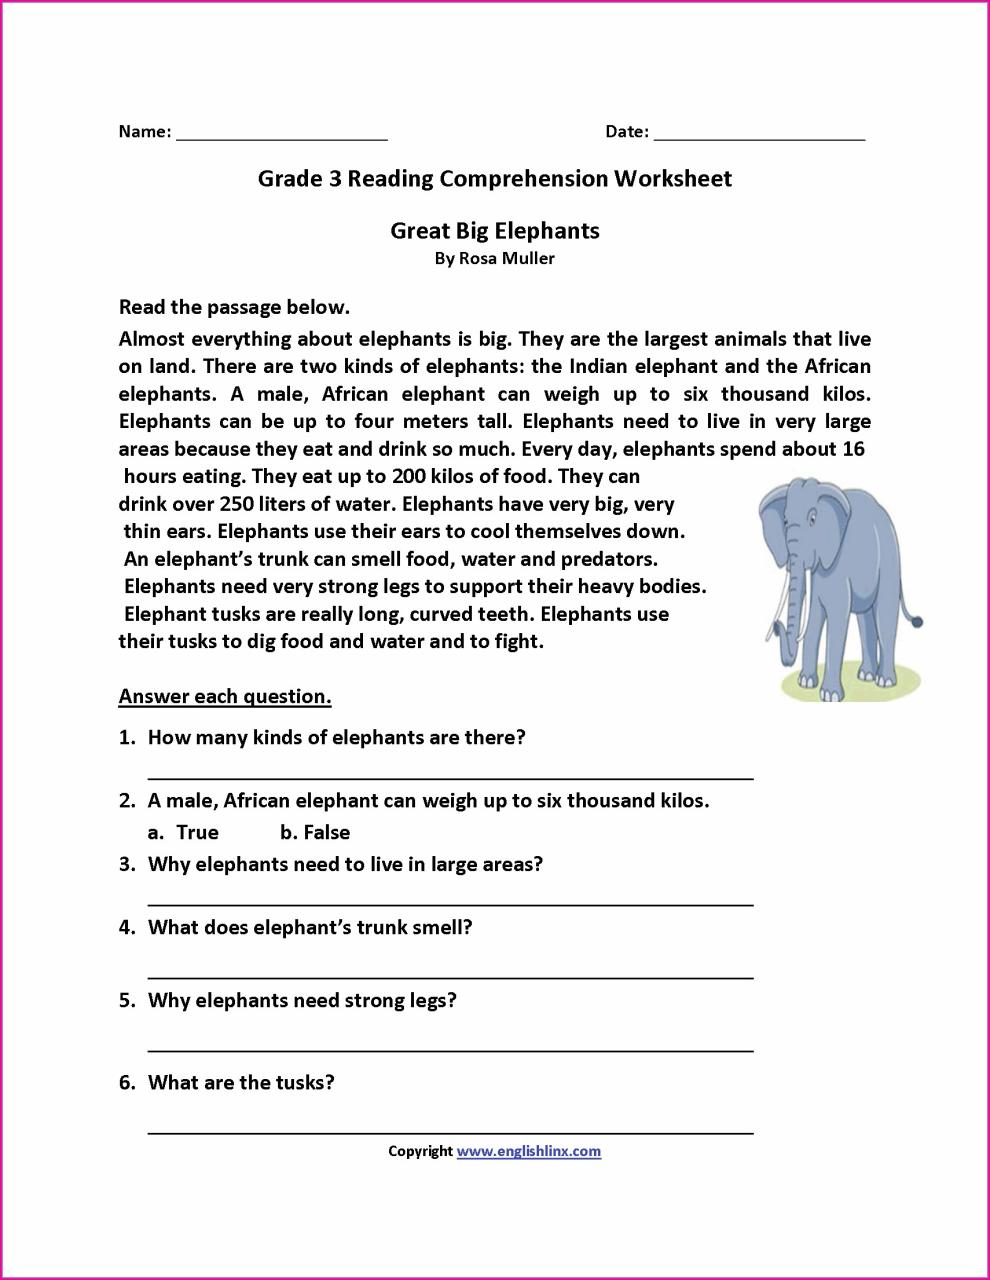 Reading Comprehension Worksheets Pdf With Answers Free